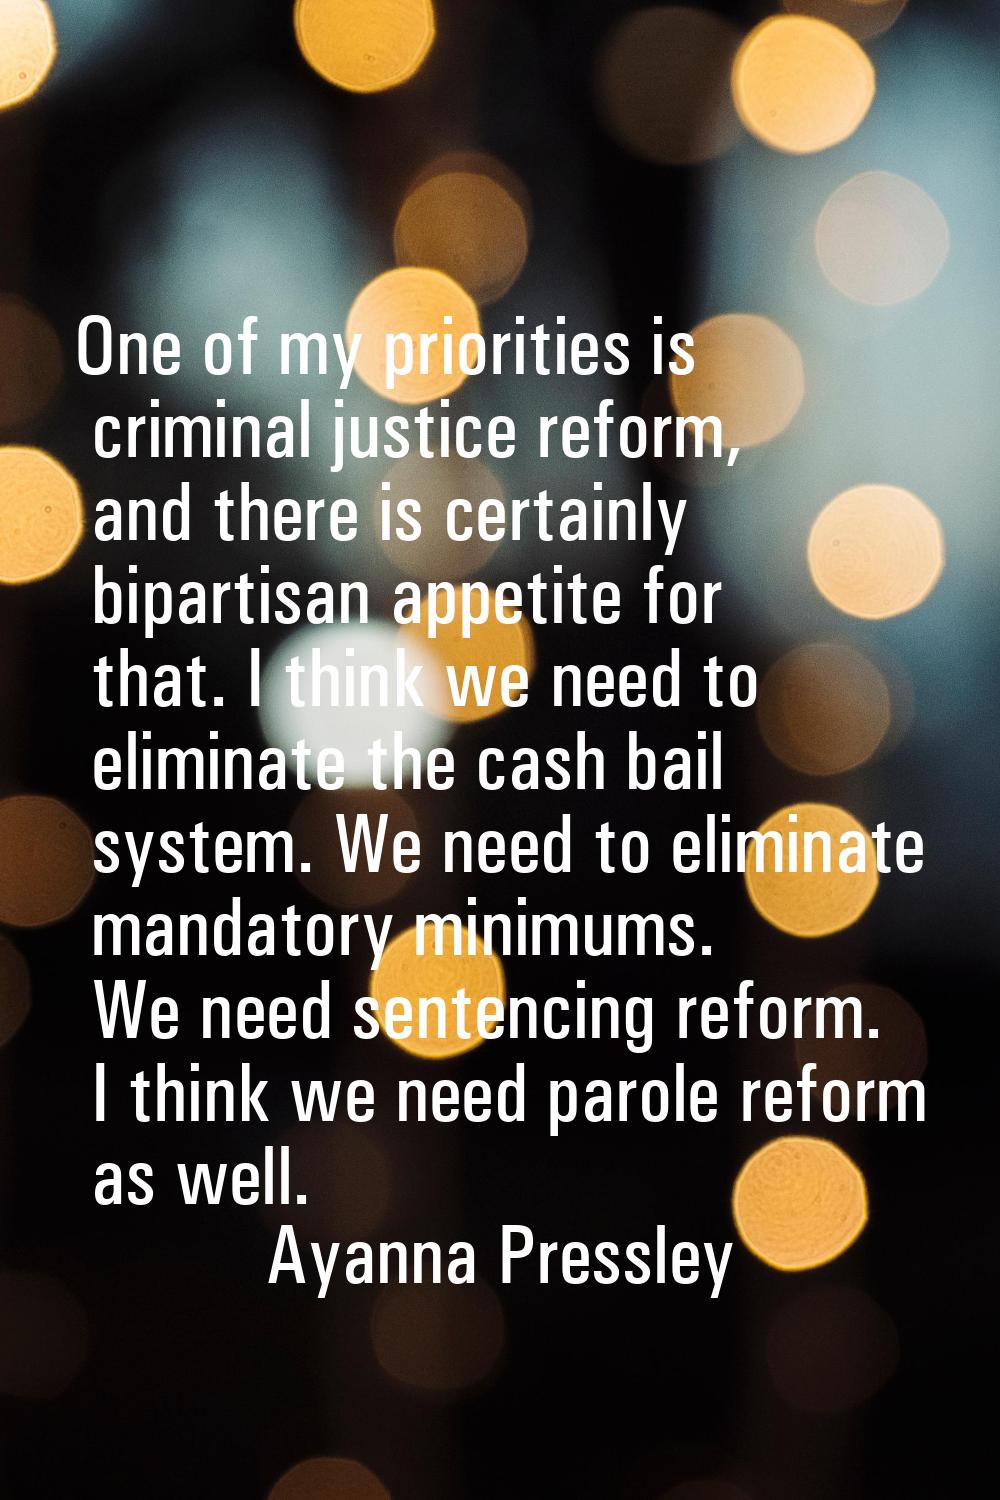 One of my priorities is criminal justice reform, and there is certainly bipartisan appetite for tha